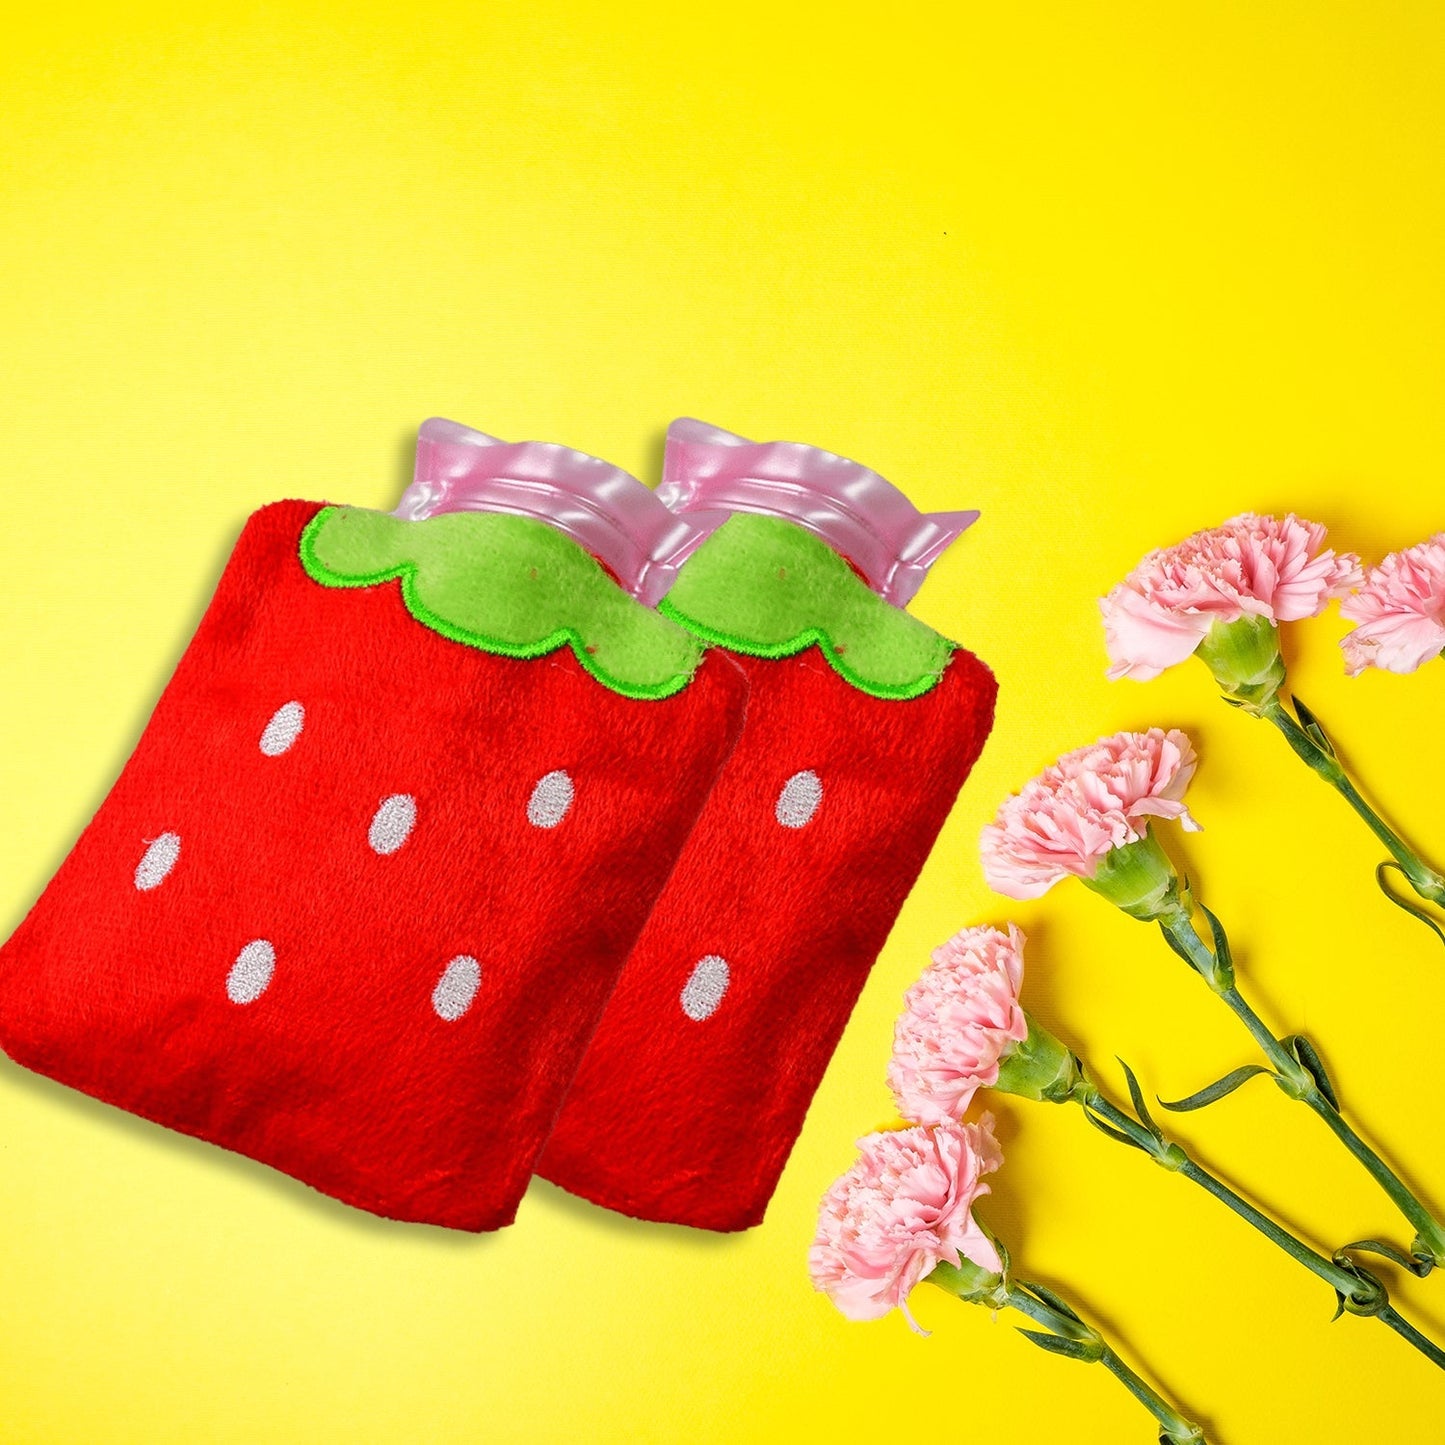 6516 Strawberry small Hot Water Bag with Cover for Pain Relief, Neck, Shoulder Pain and Hand, Feet Warmer, Menstrual Cramps. DeoDap